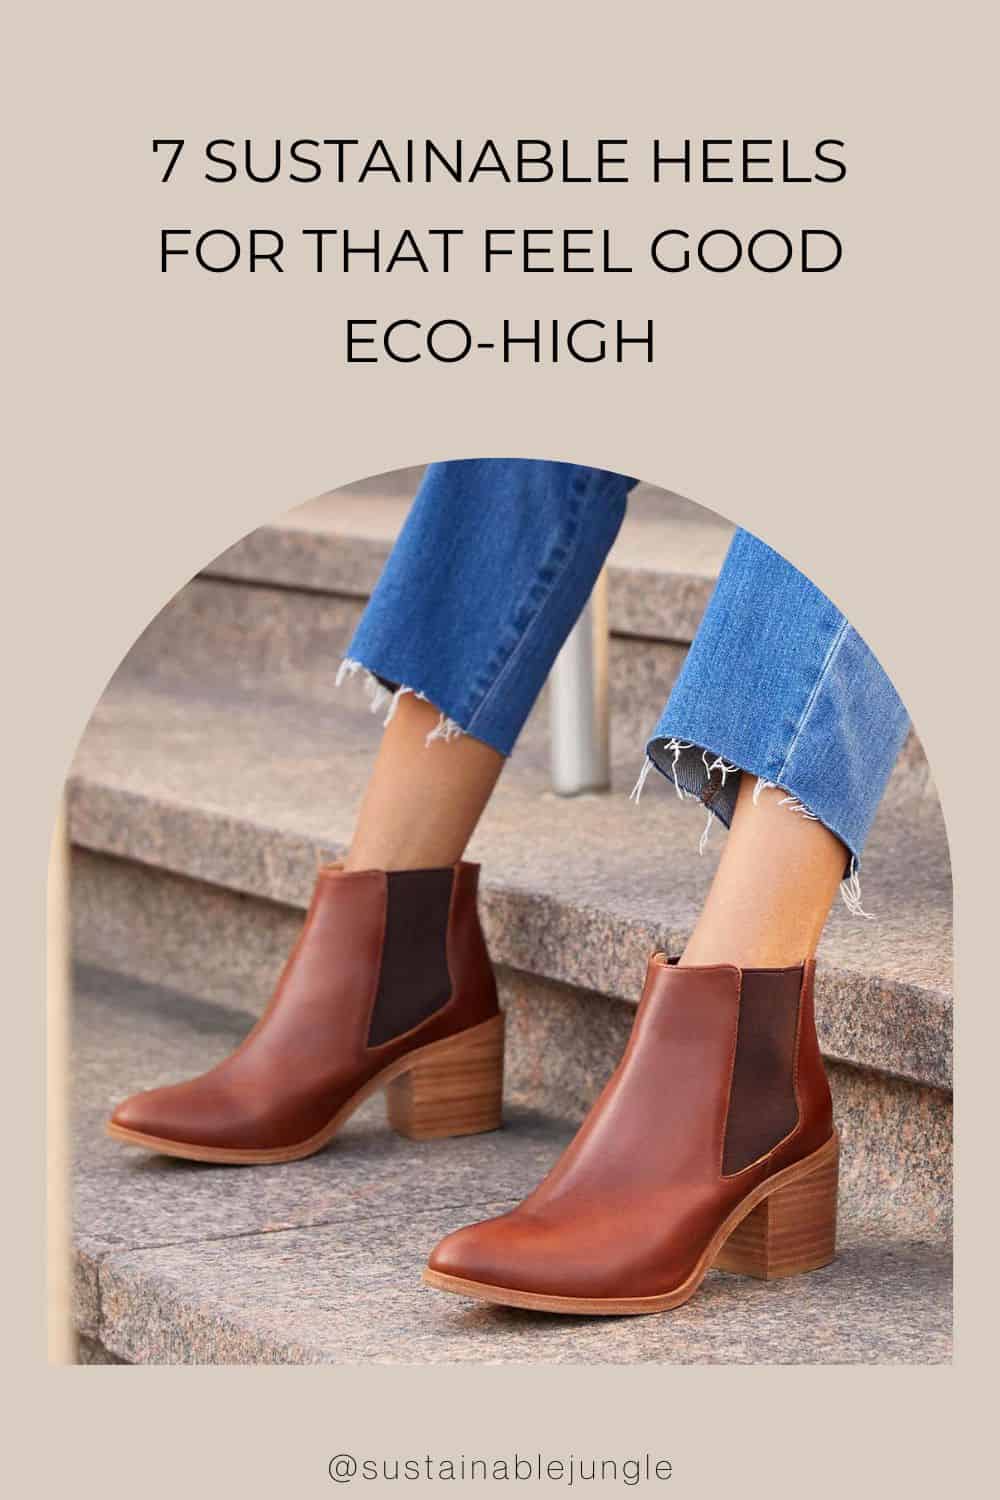 7 Sustainable Heels For That Feel Good Eco-High Image by Nisolo #sustainableheels #sustainablehighheels #ecoheels #ecohighheels #sustainableshoesheels #ethicalandsustainableheels #sustainablejungle